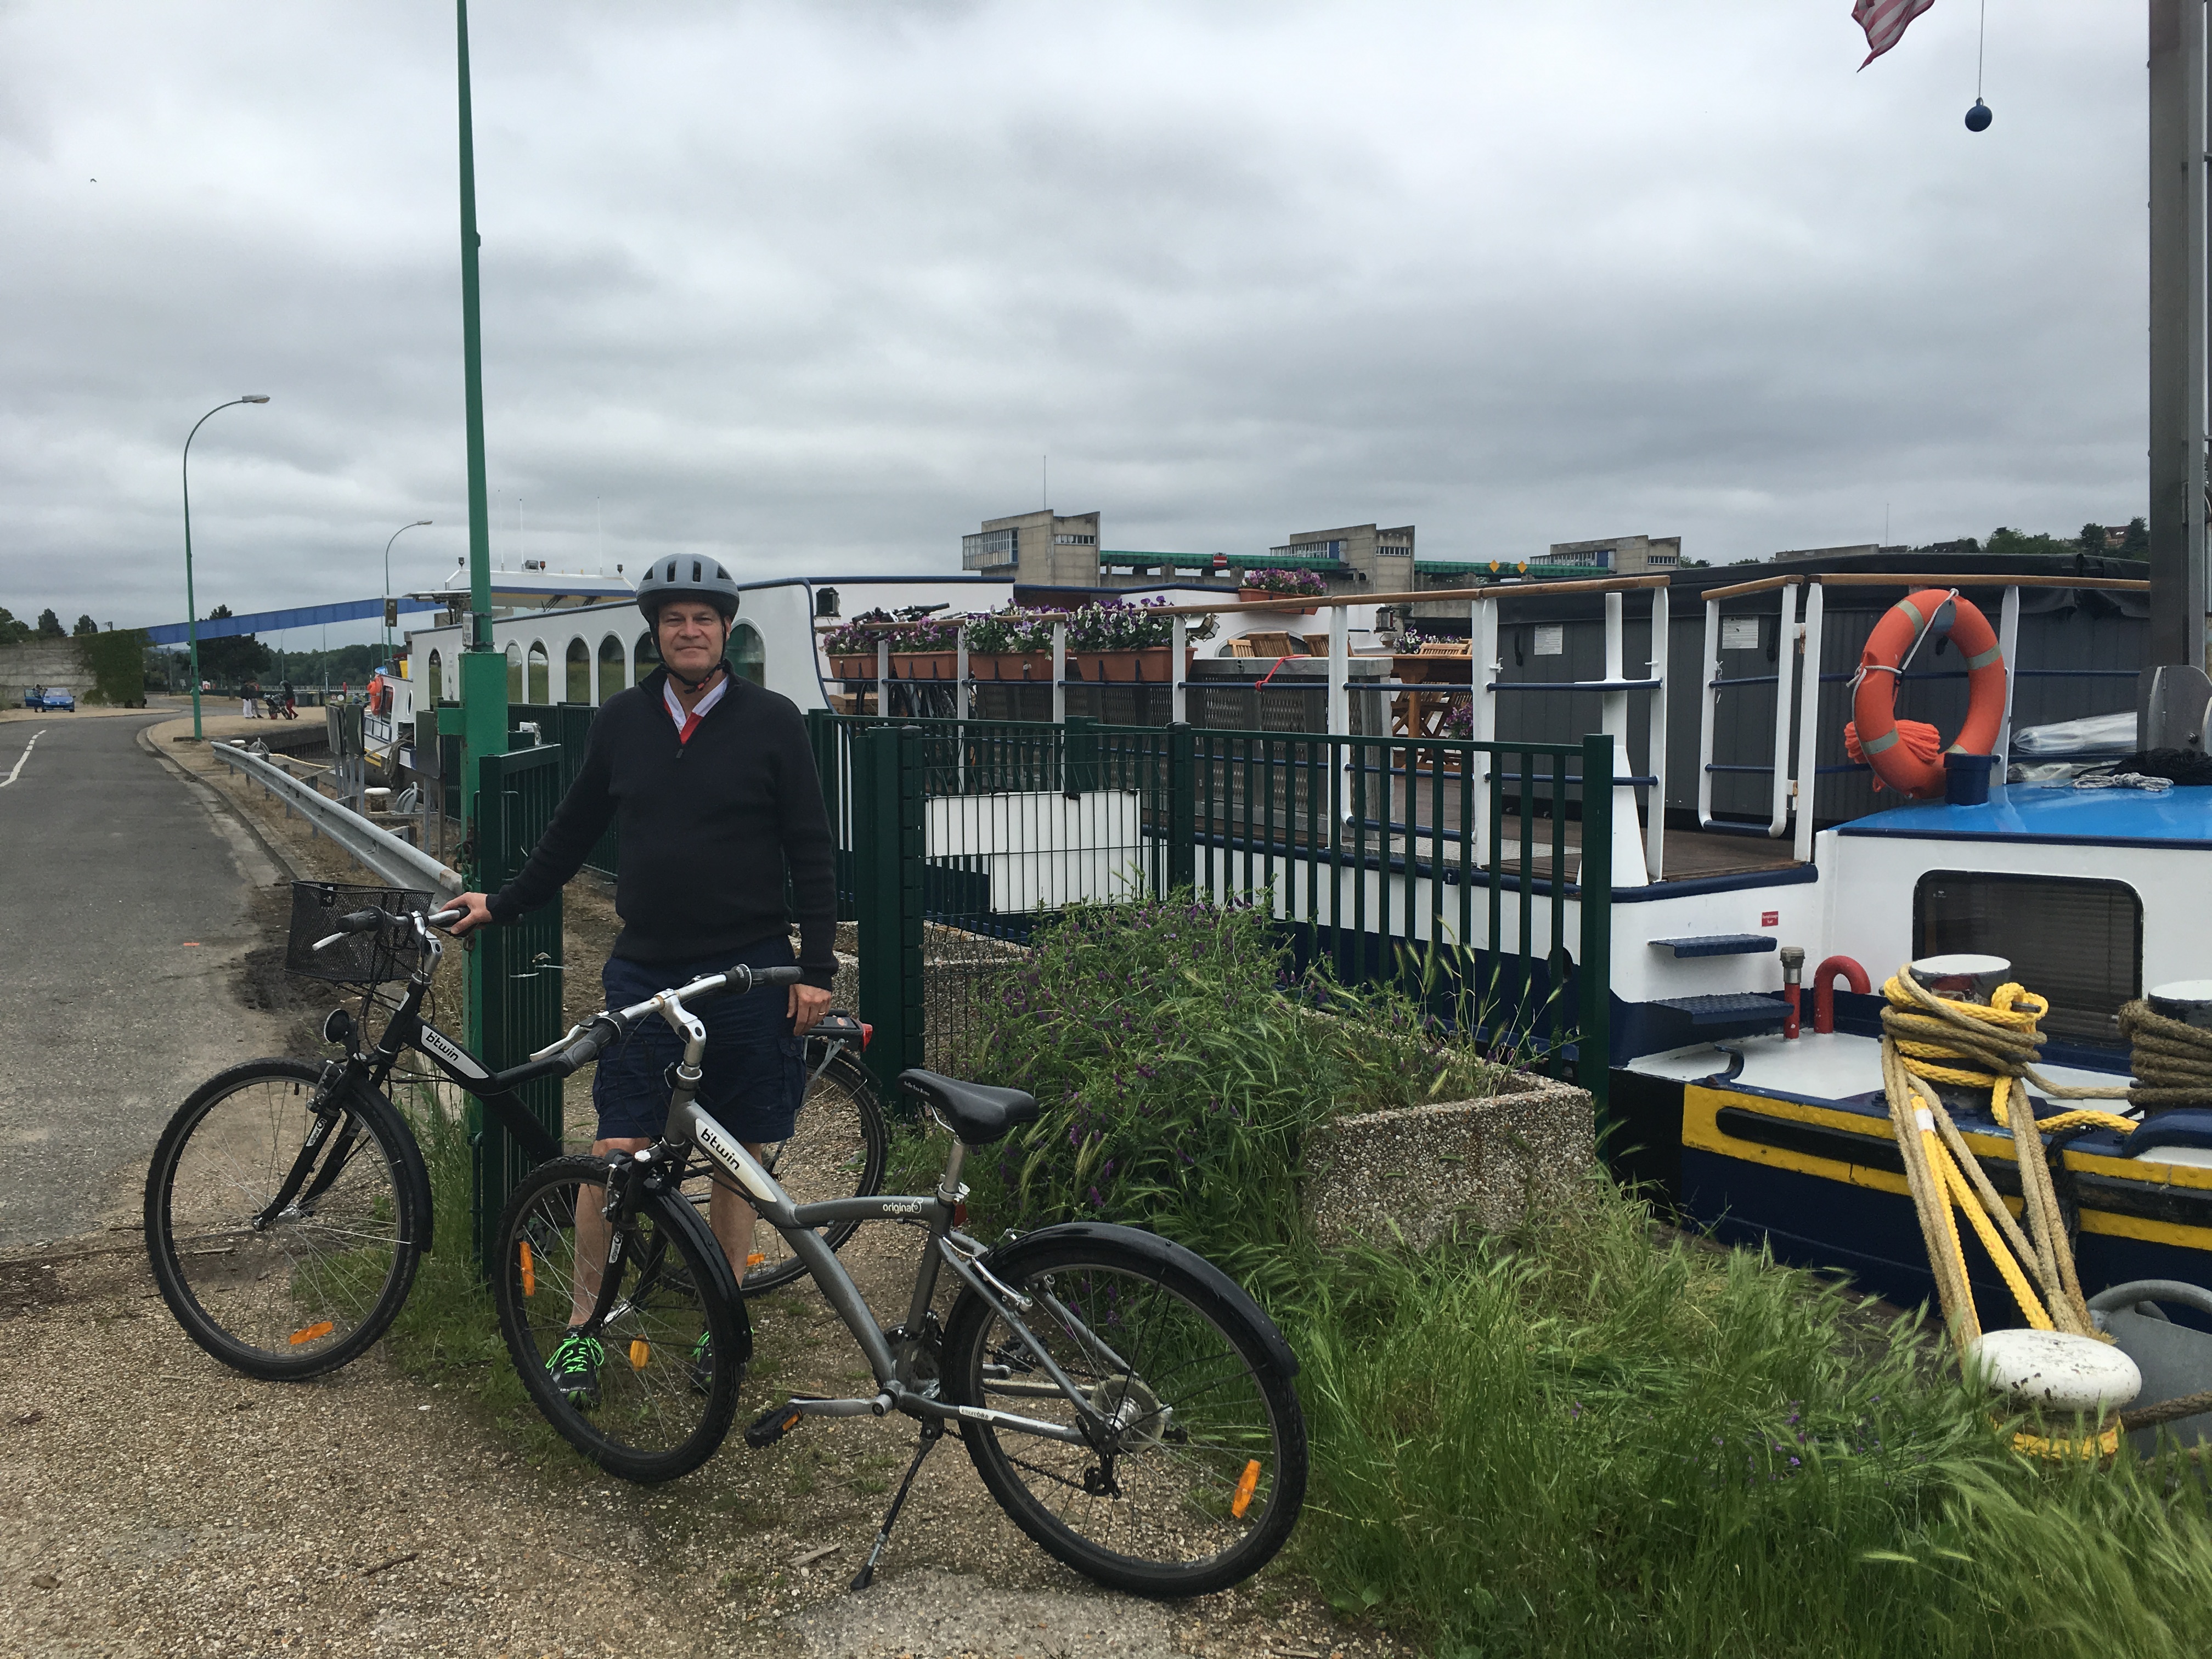 Cycling along Canal - Finding Balance on a Barge in France